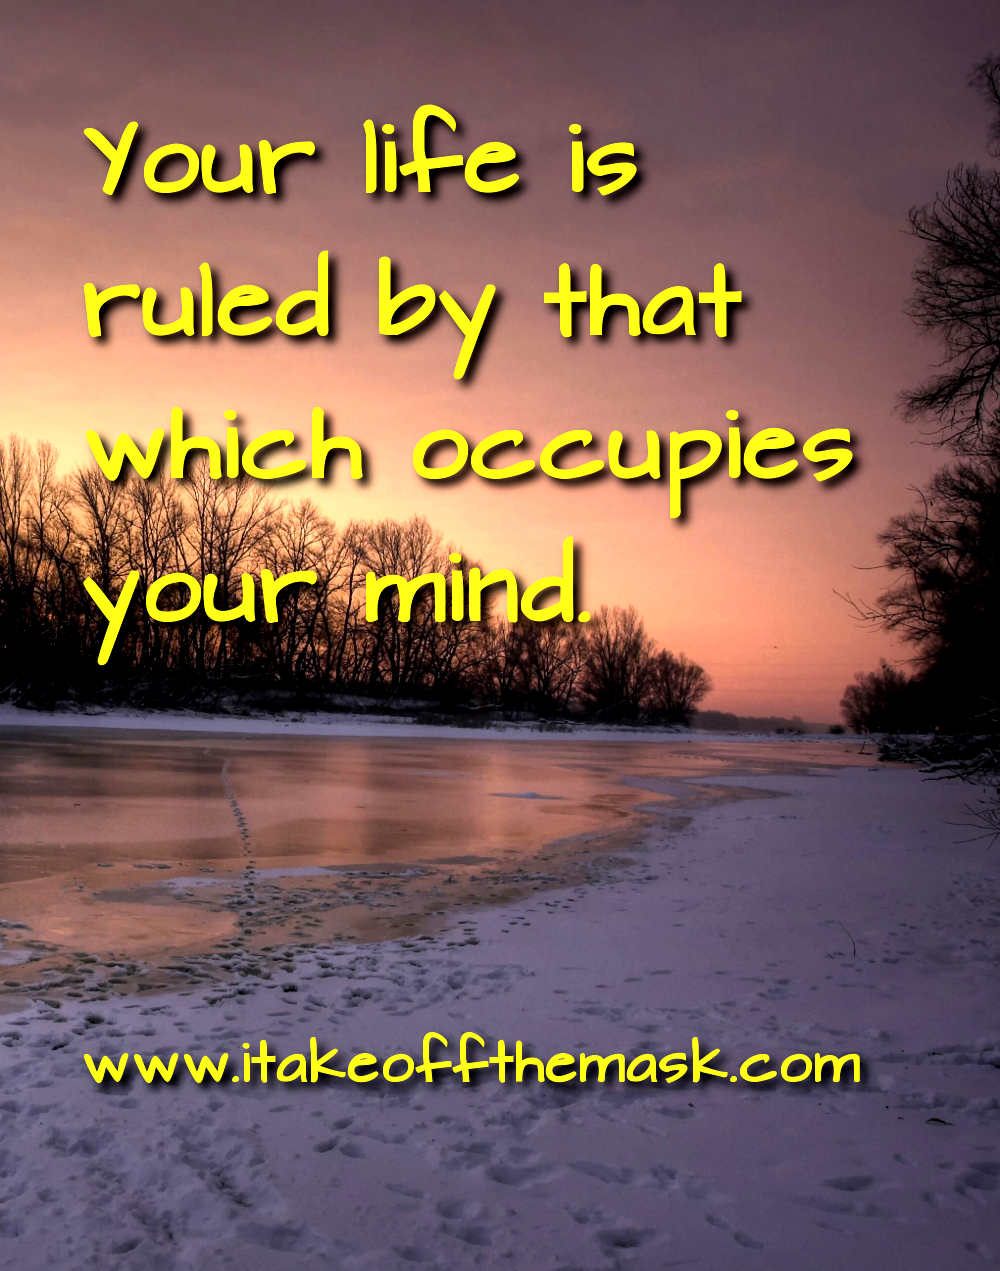 your life is ruled by that which occupies your mind